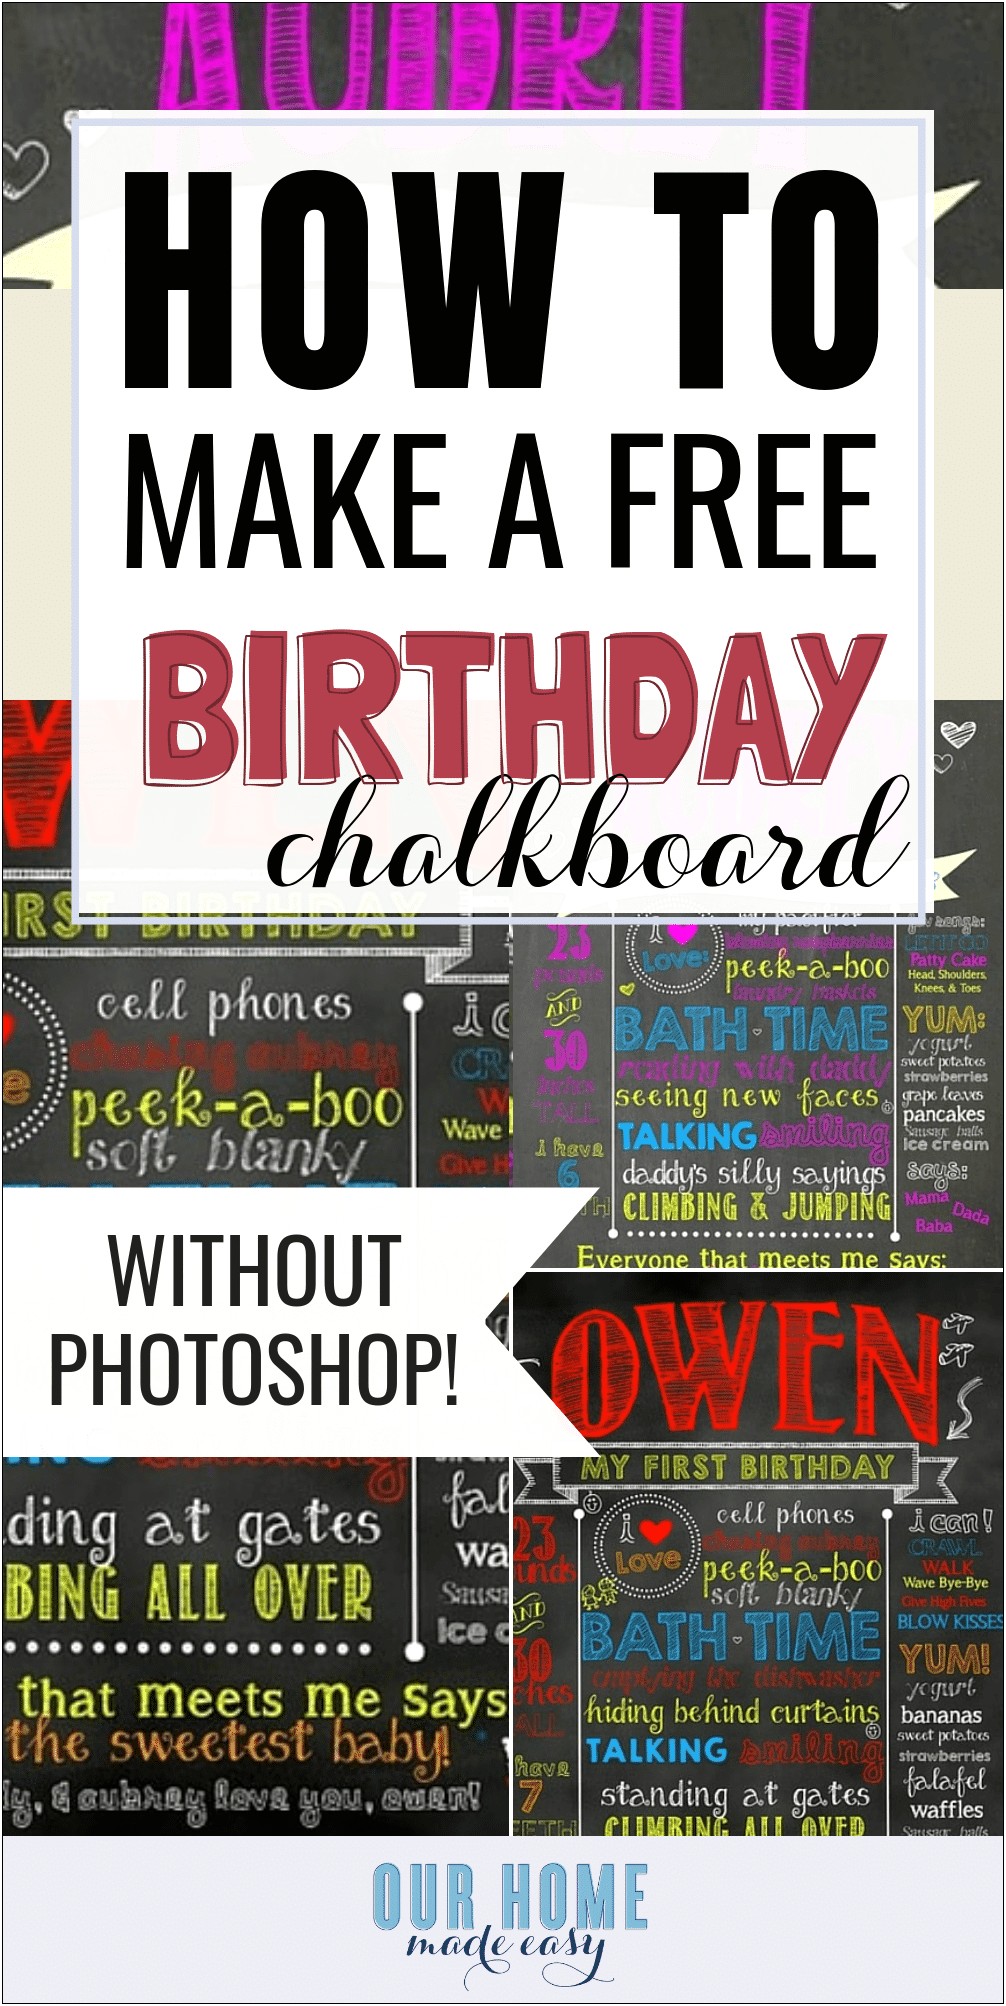 first-birthday-chalkboard-template-free-download-templates-resume-designs-a81bypwjao